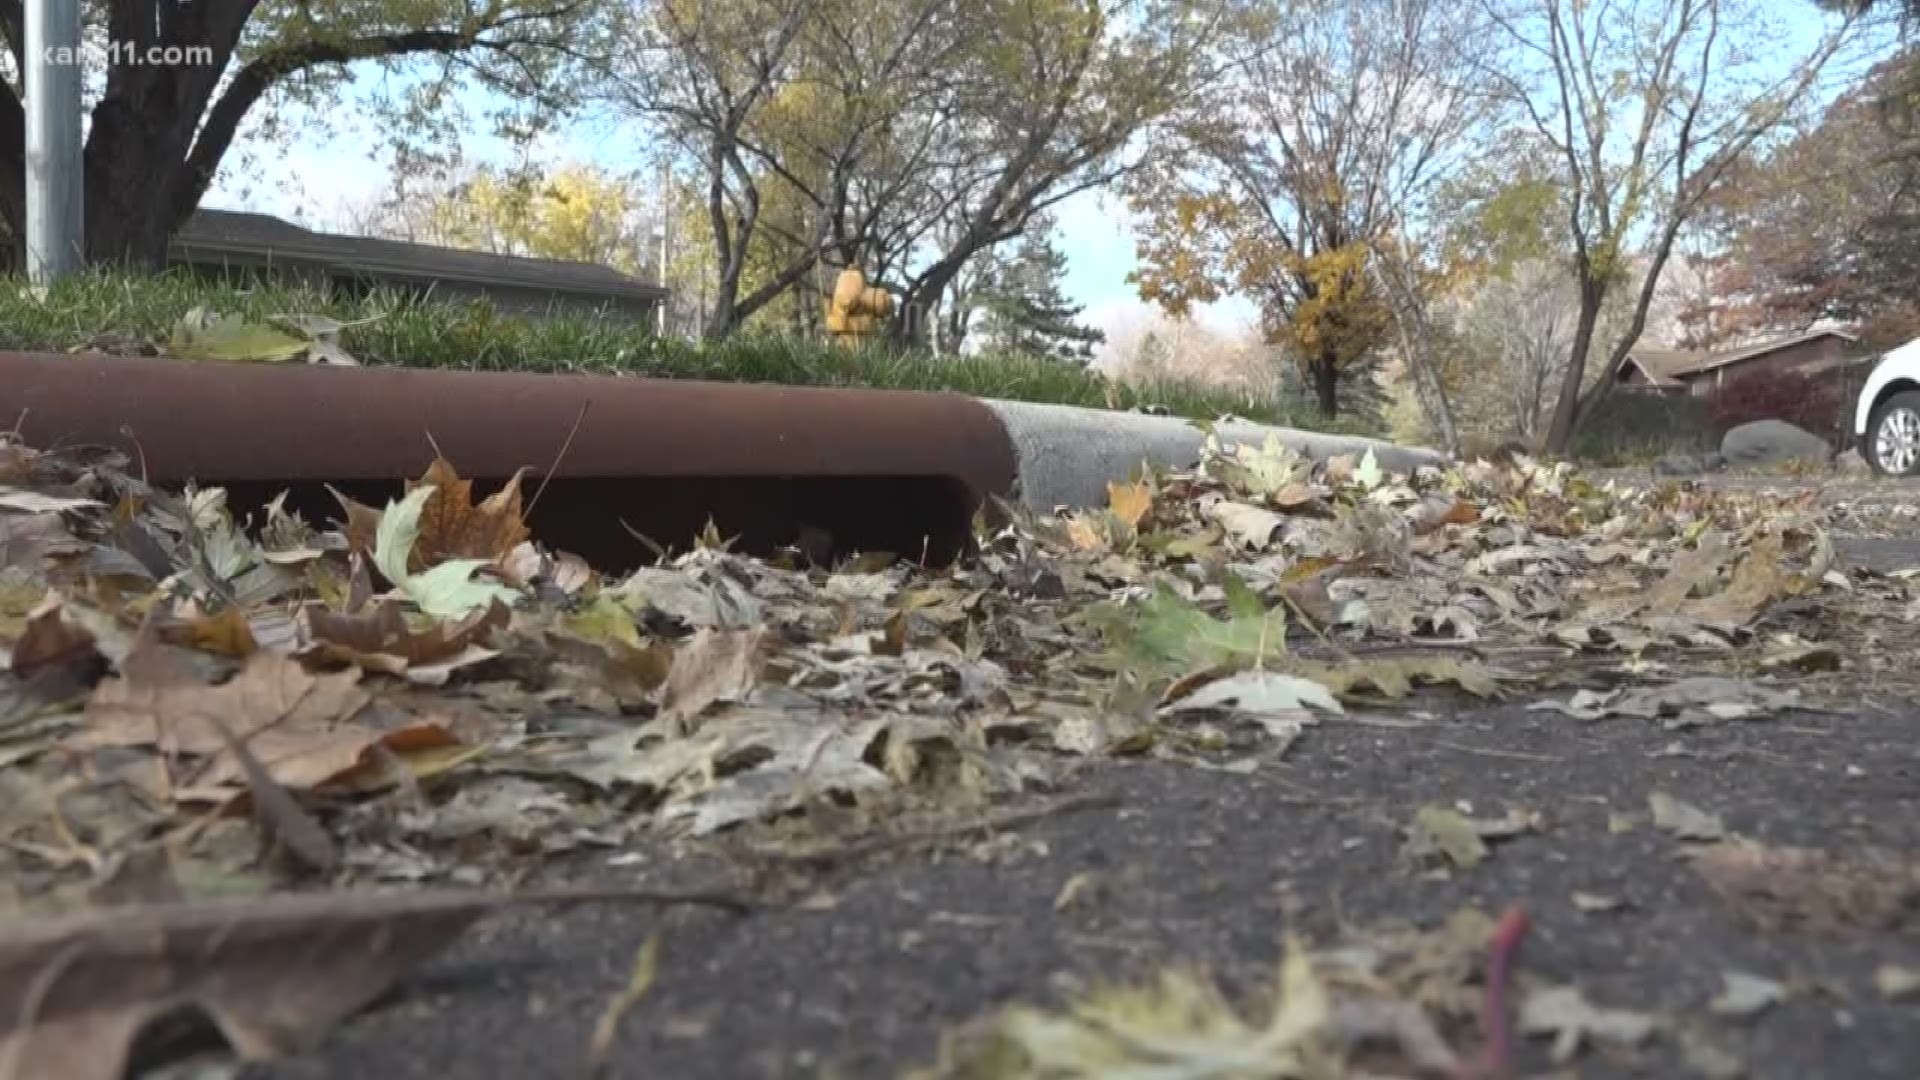 The storm drains on your street are meant for collecting water. But this time of year they tend to collect more leaves than anything else.